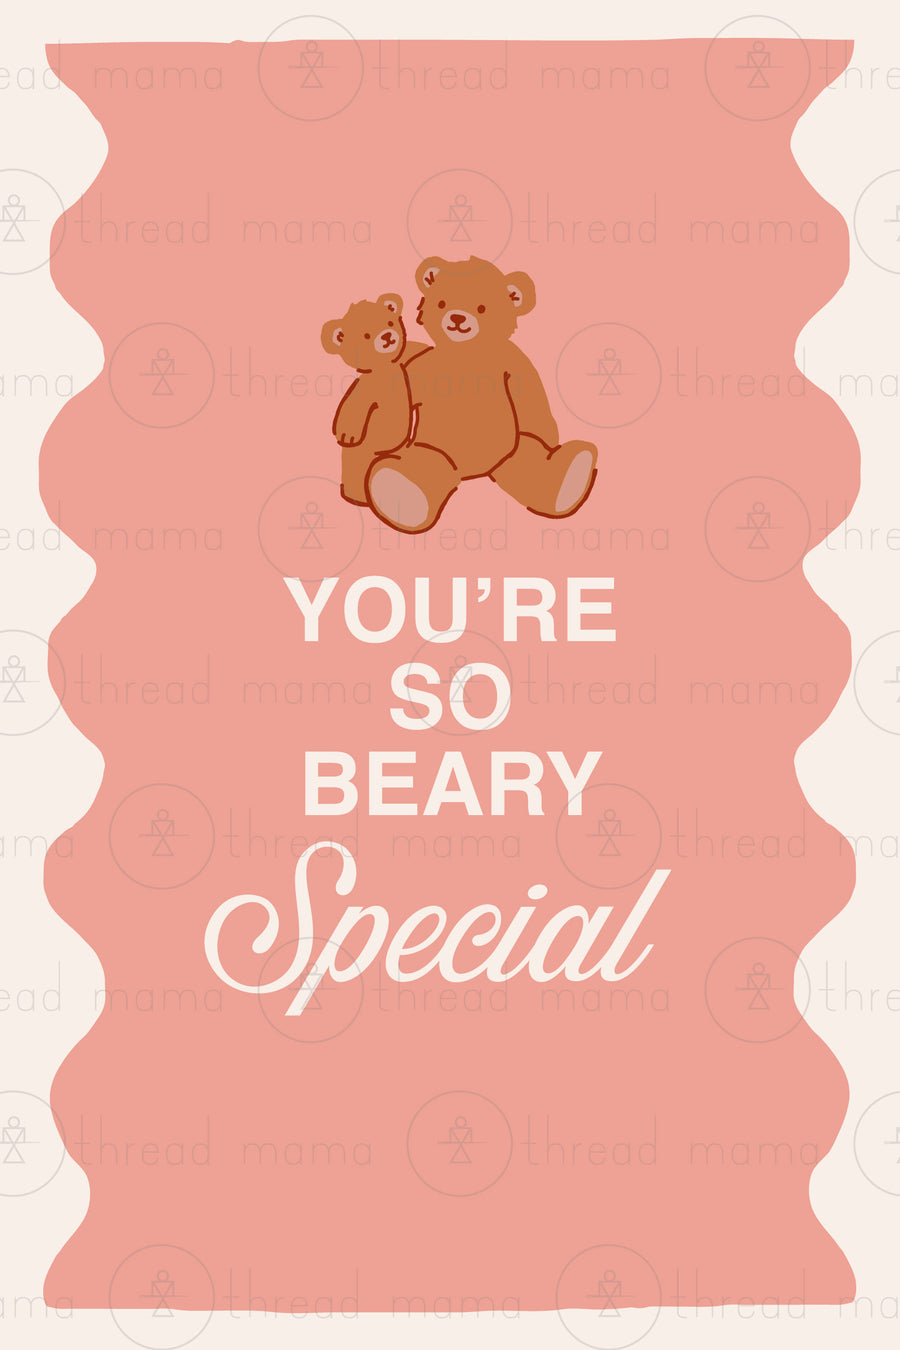 You're So Beary Special